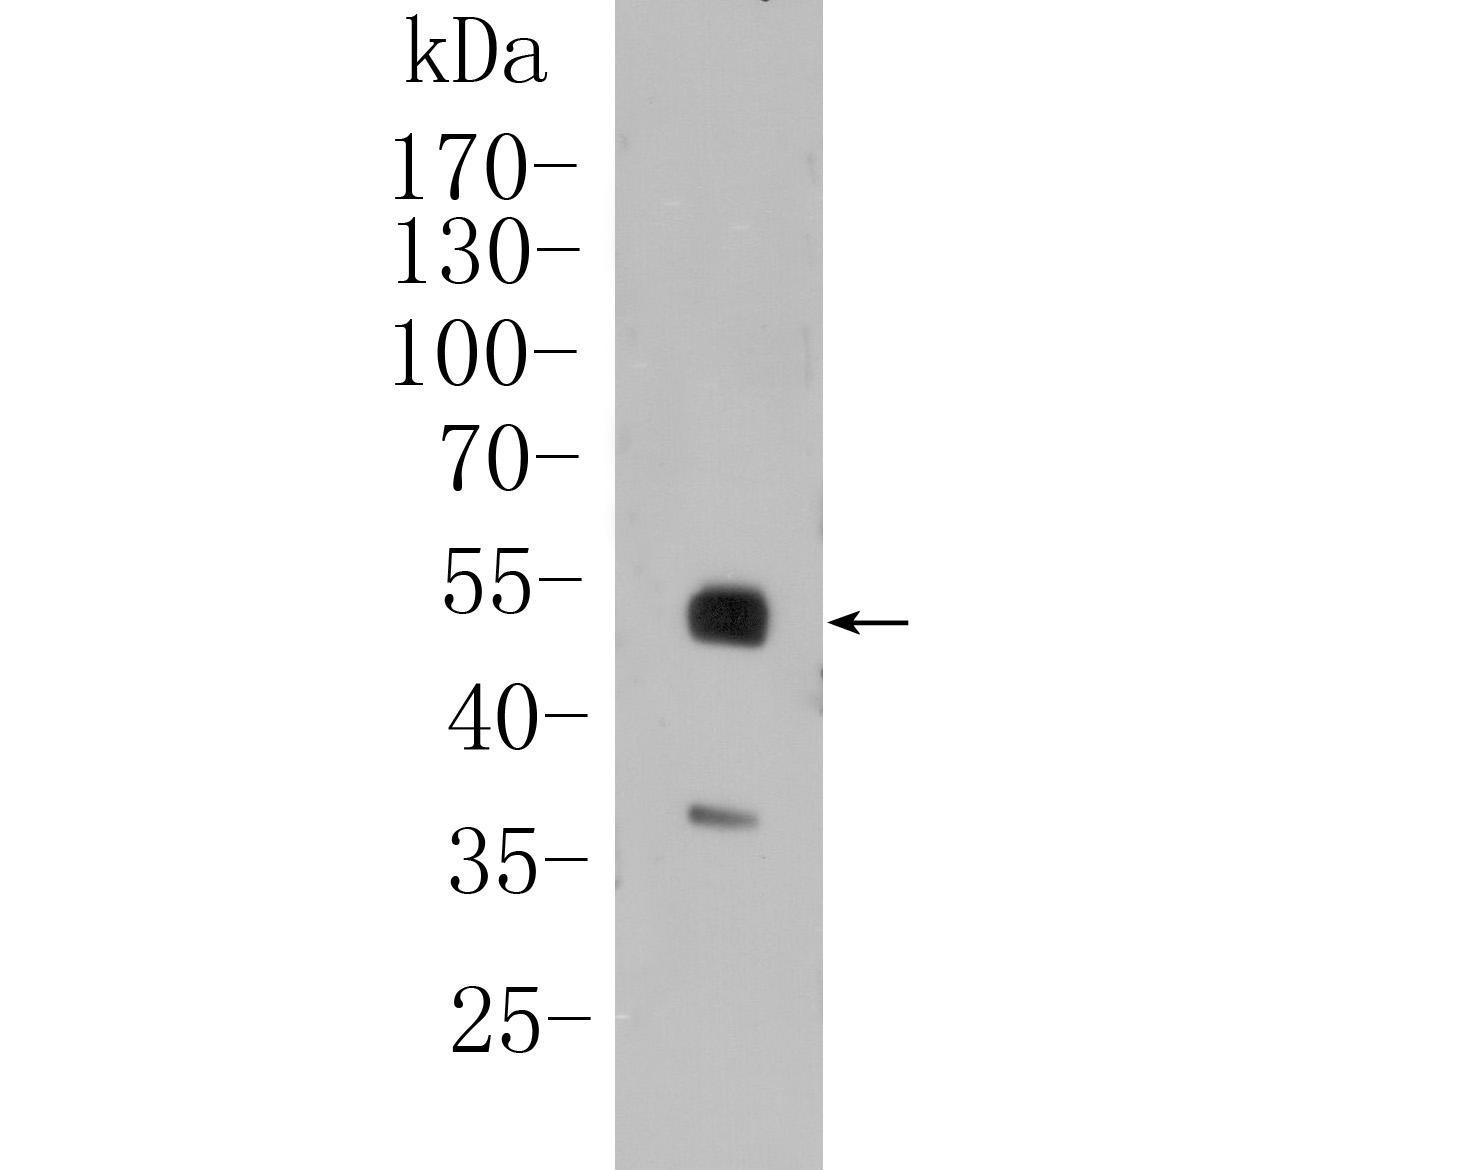 Western blot analysis of PAX8 on SKOV-3 cell lysate. Proteins were transferred to a PVDF membrane and blocked with 5% BSA in PBS for 1 hour at room temperature. The primary antibody (ET1612-61, 1/500) was used in 5% BSA at room temperature for 2 hours. Goat Anti-Rabbit IgG - HRP Secondary Antibody (HA1001) at 1:5,000 dilution was used for 1 hour at room temperature.